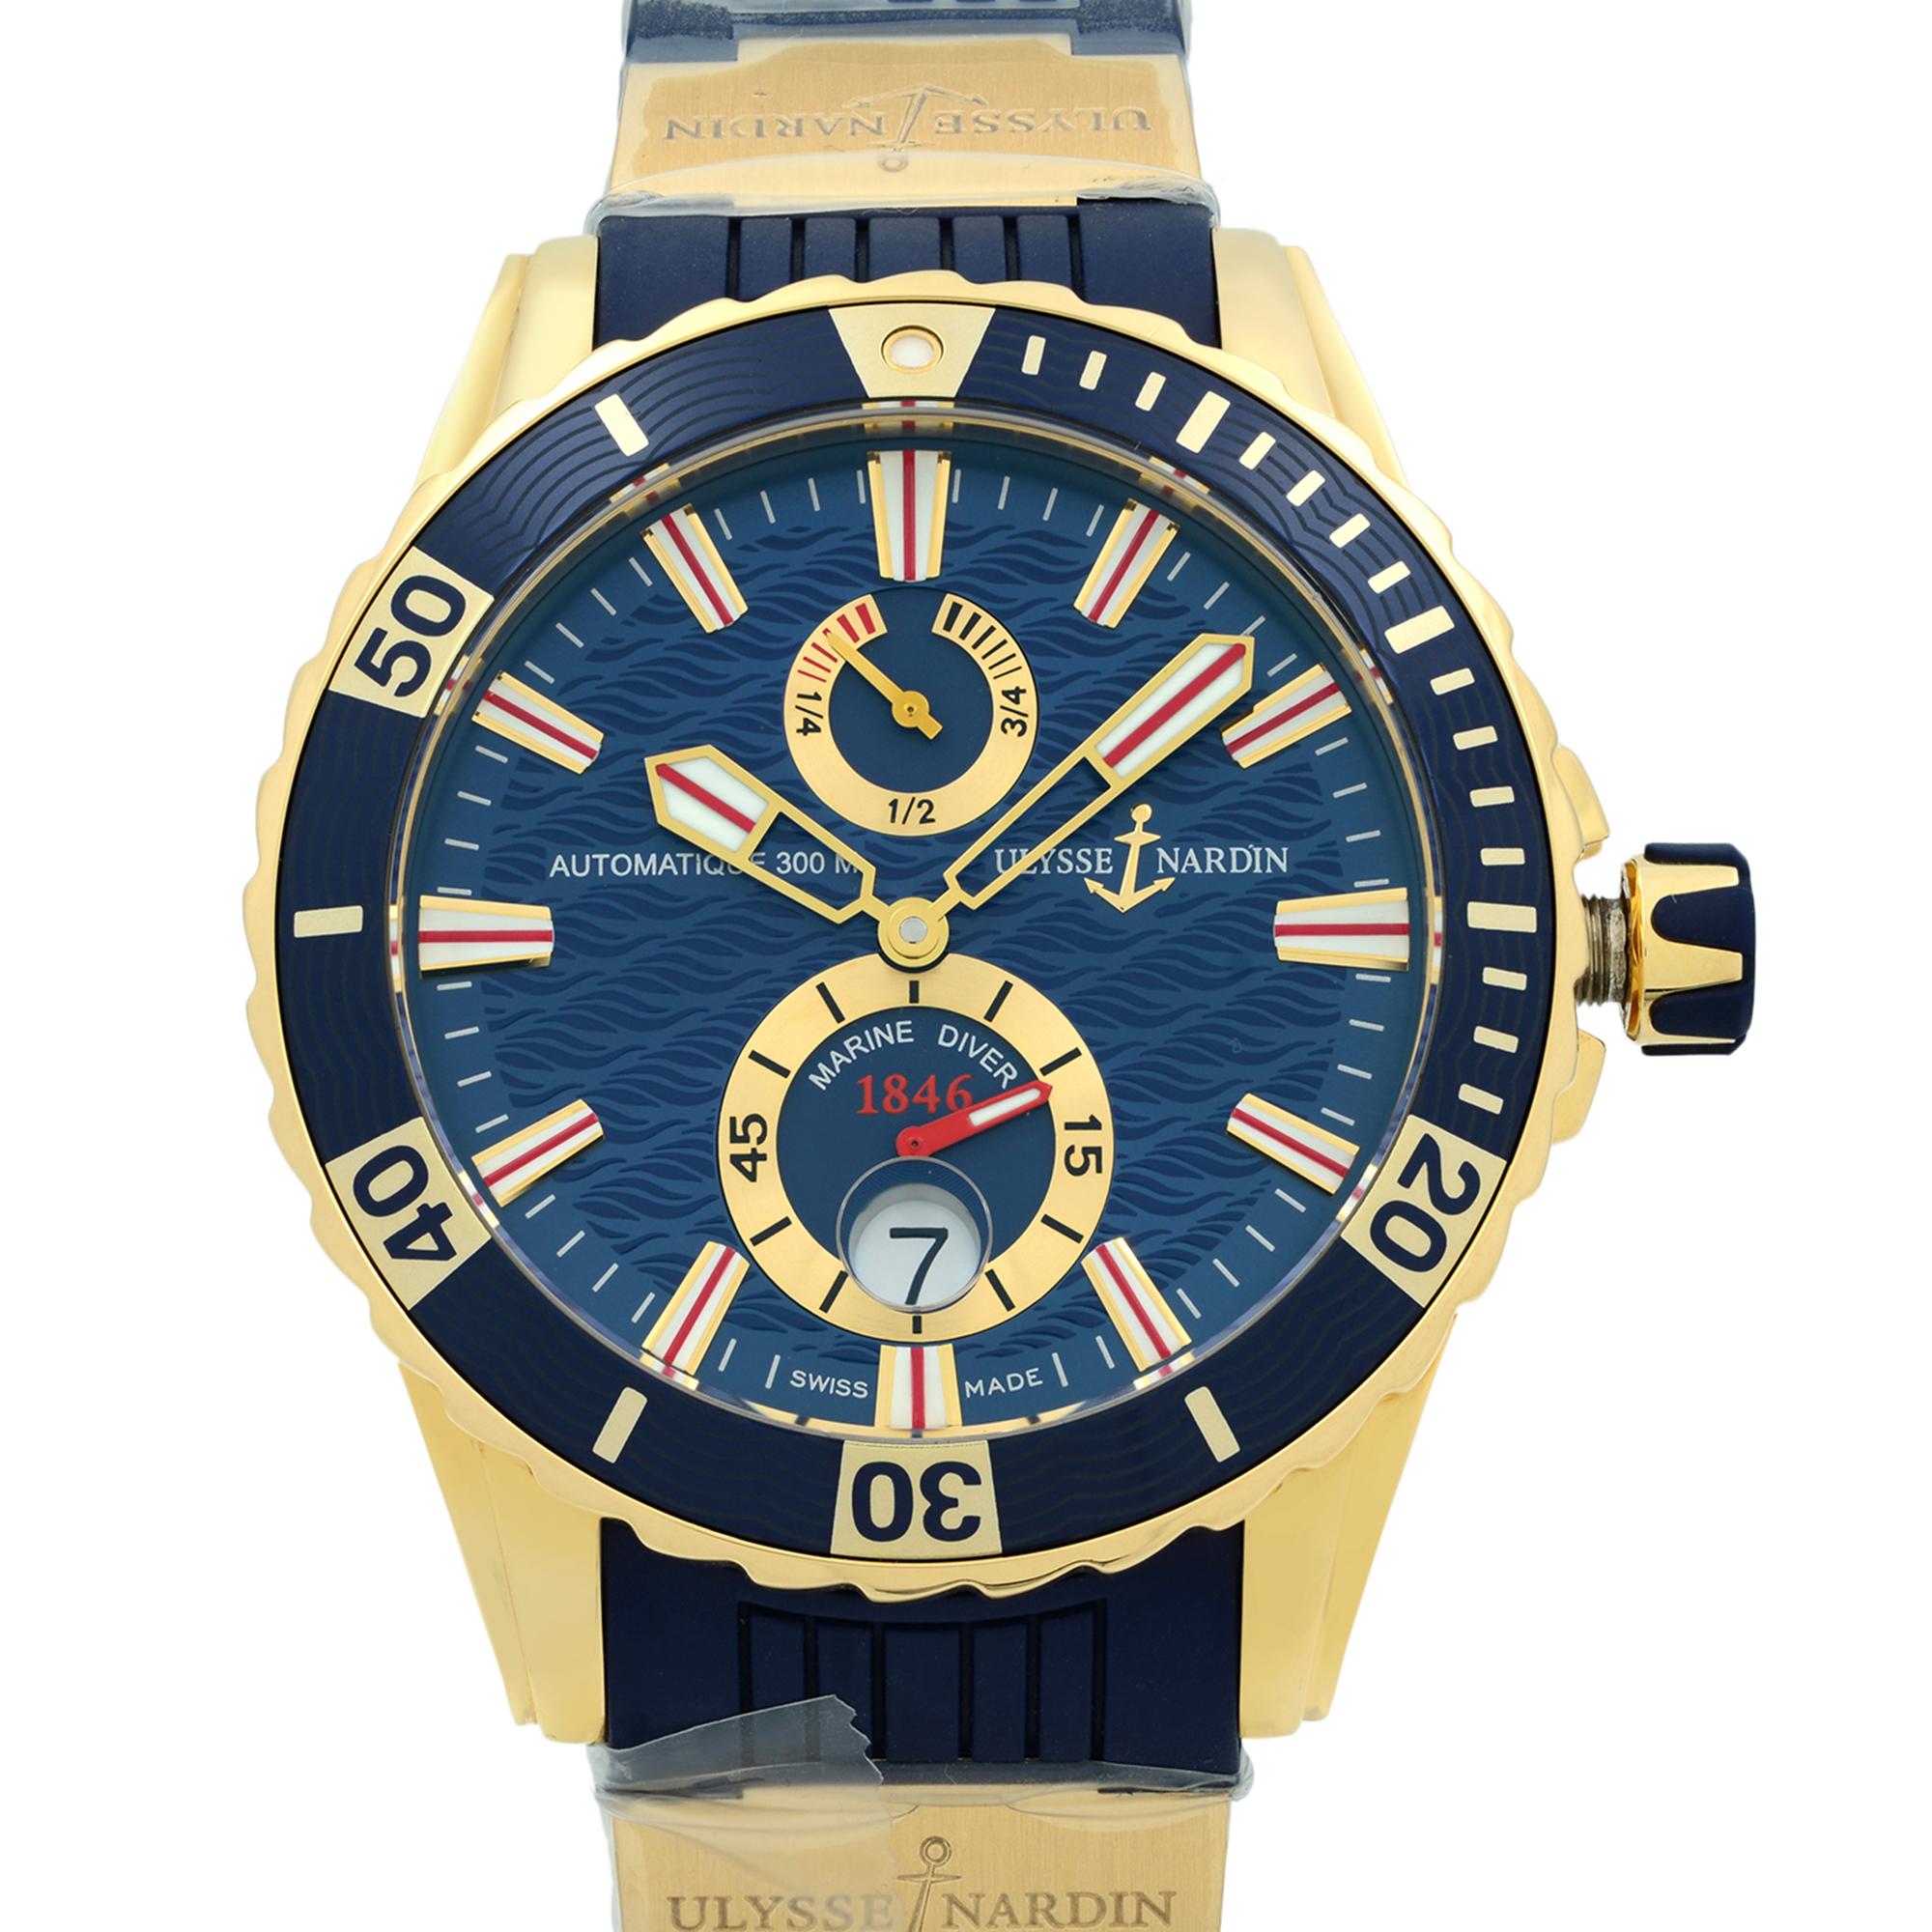 This watch Has no Signs of wear and comes with manufacturers' box and papers. Covered by a one-year Chronostore warranty
Details:
MSRP 31700
Brand Ulysse Nardin
Department Men
Model Number 266-10-3-93
Model Ulysse Nardin Maxi Marine
Style Diver,